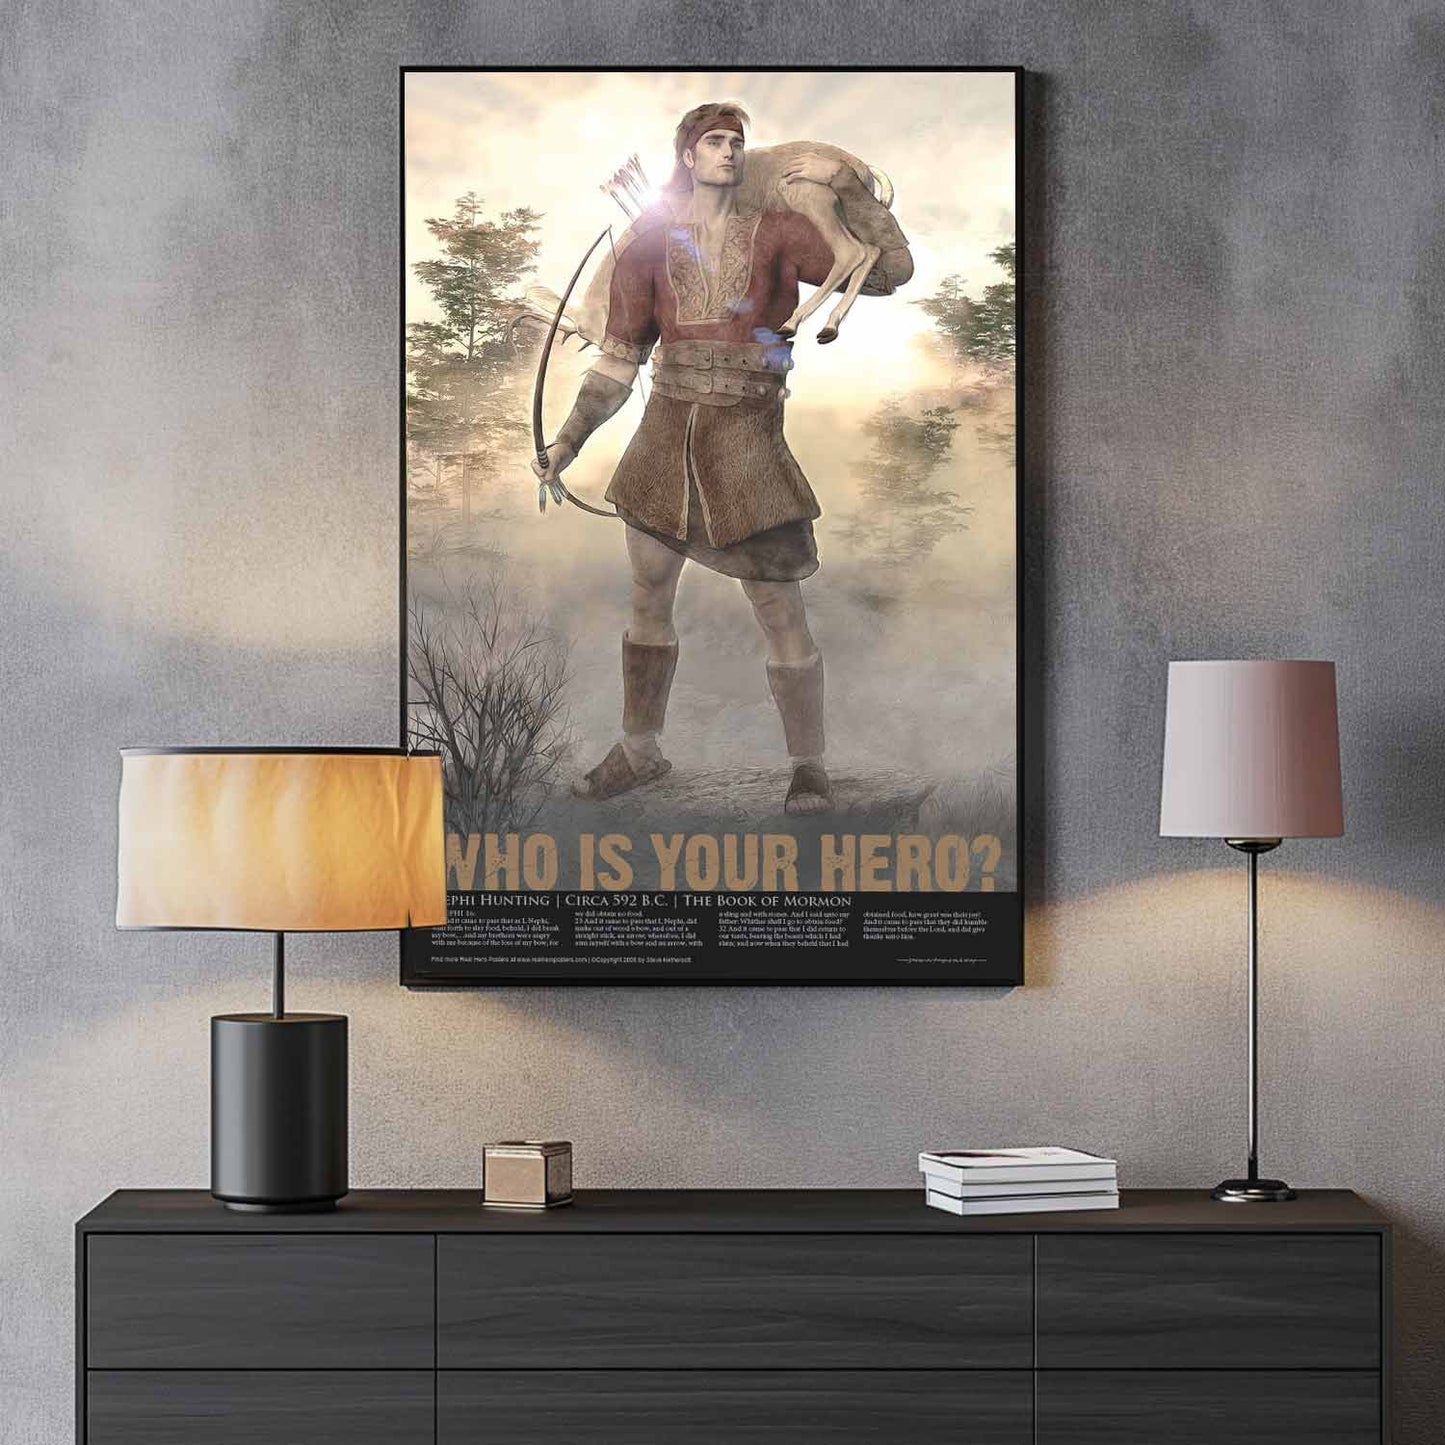 Nephi Hunting | Poster